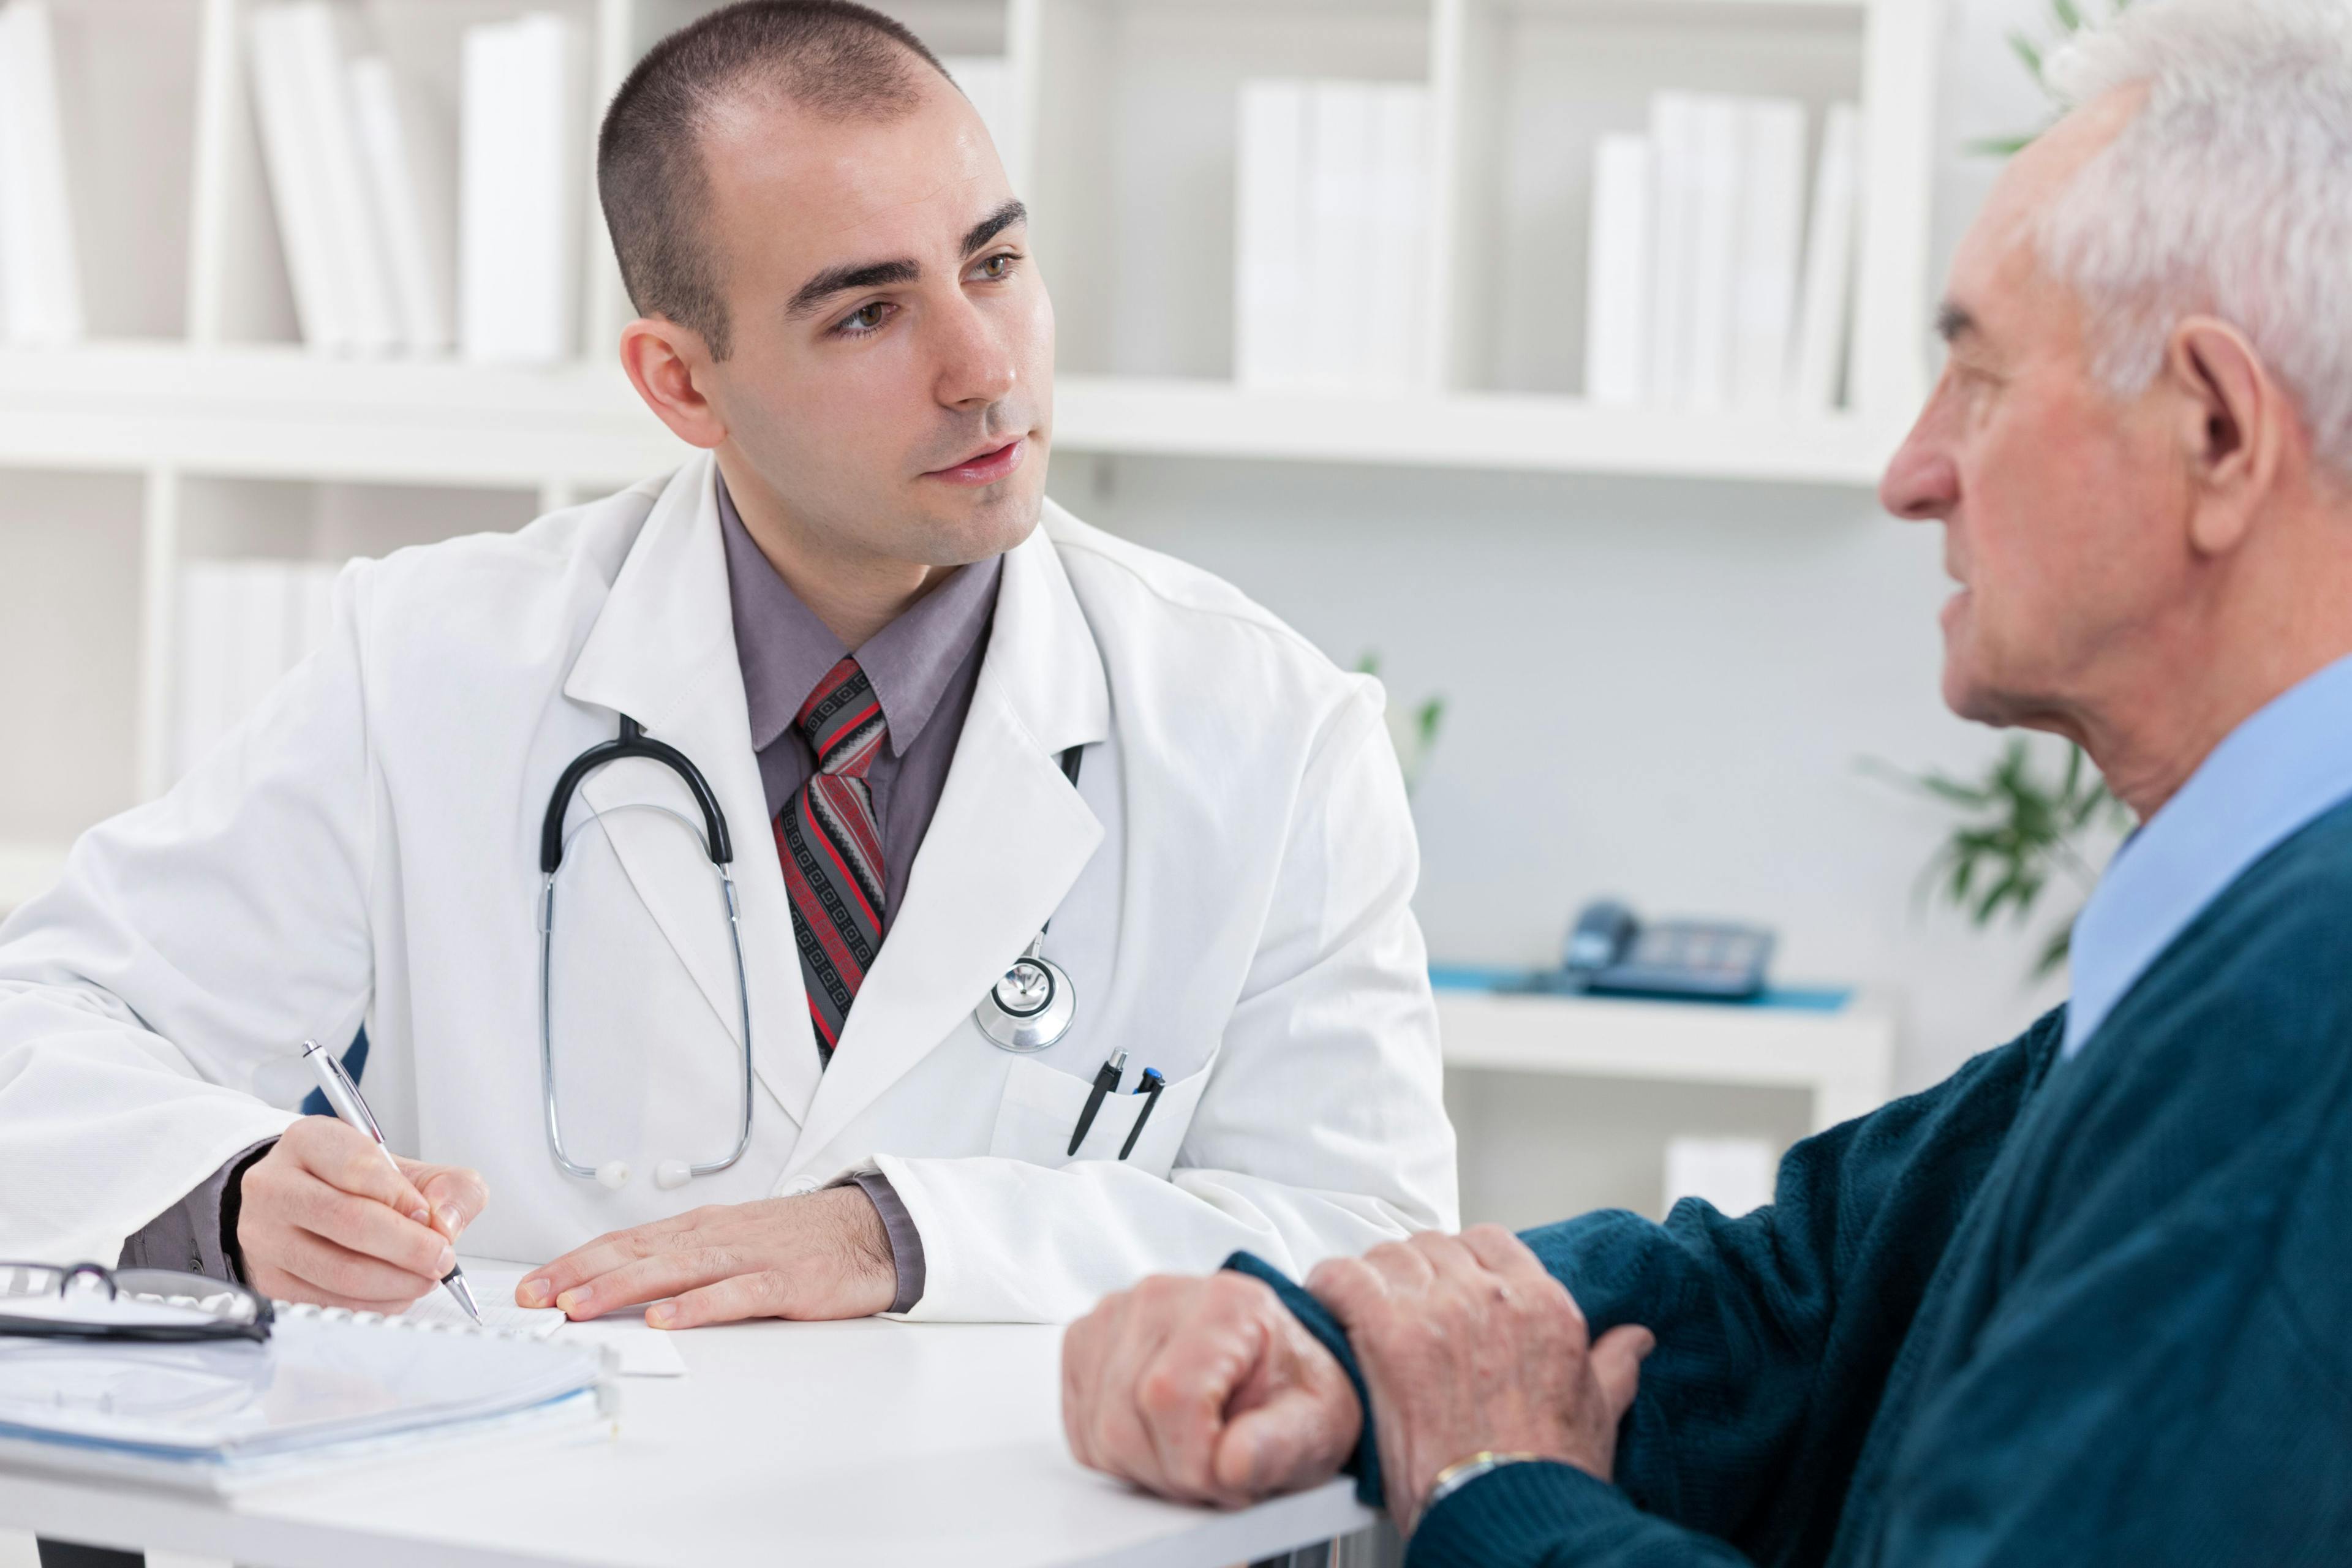 Doctor speaking with patient - stock.adobe.com